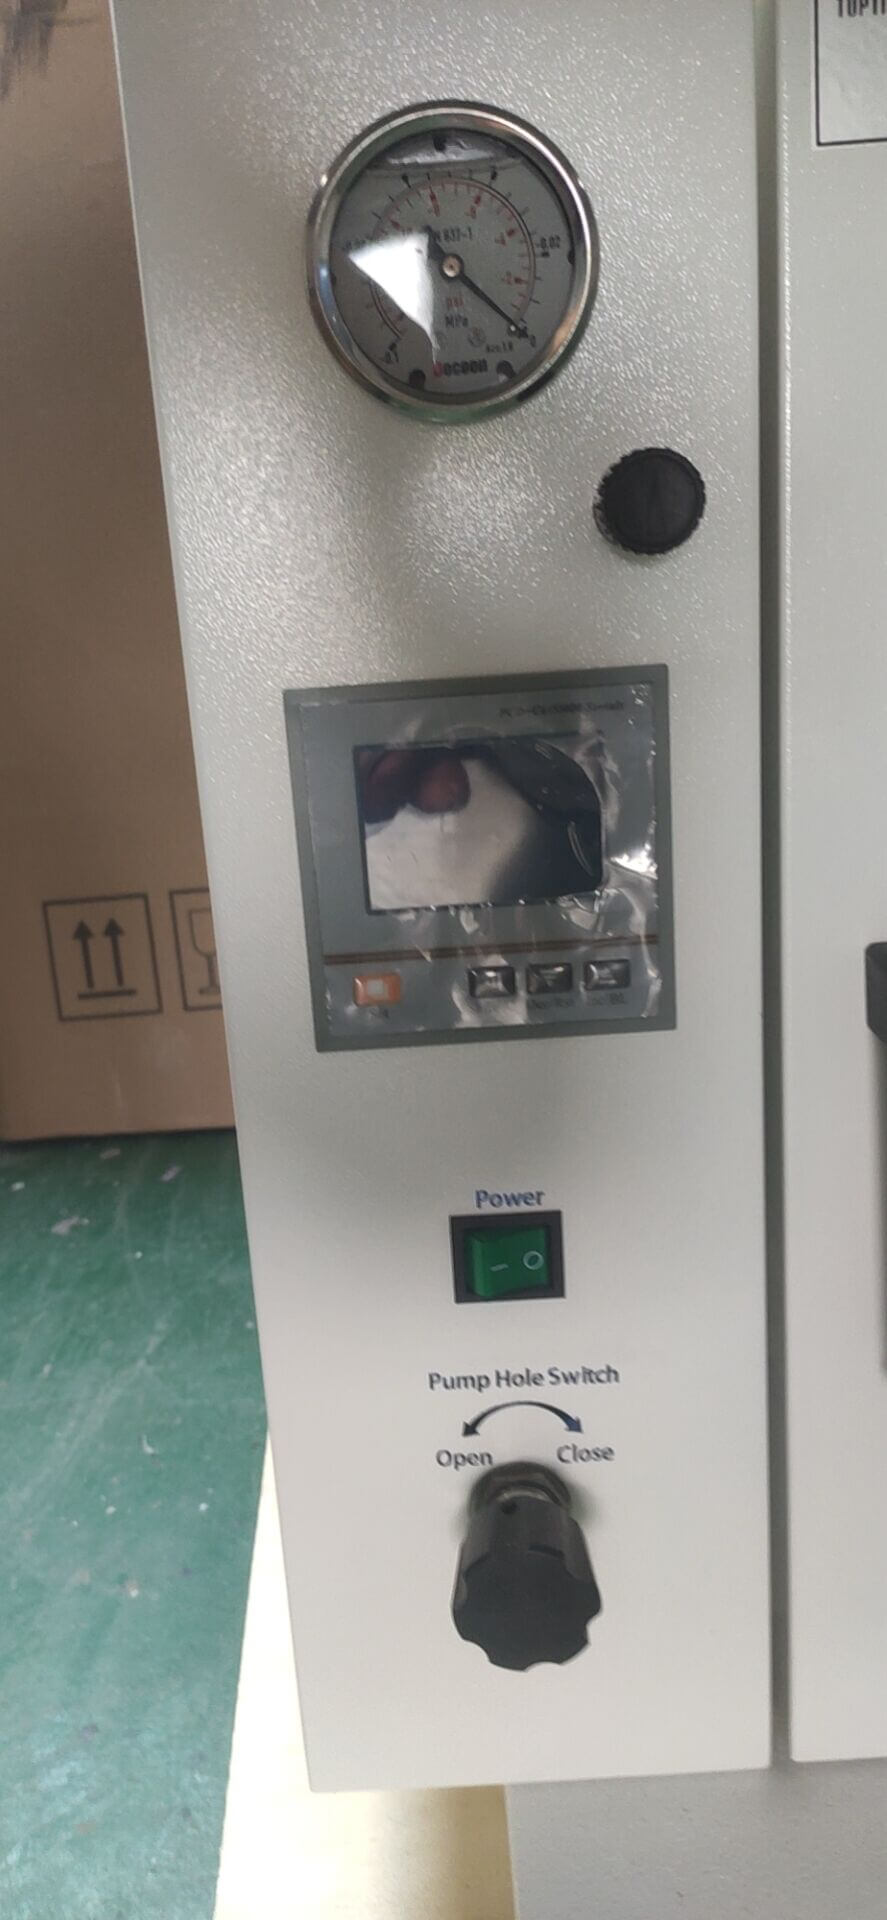 drying oven operation interface